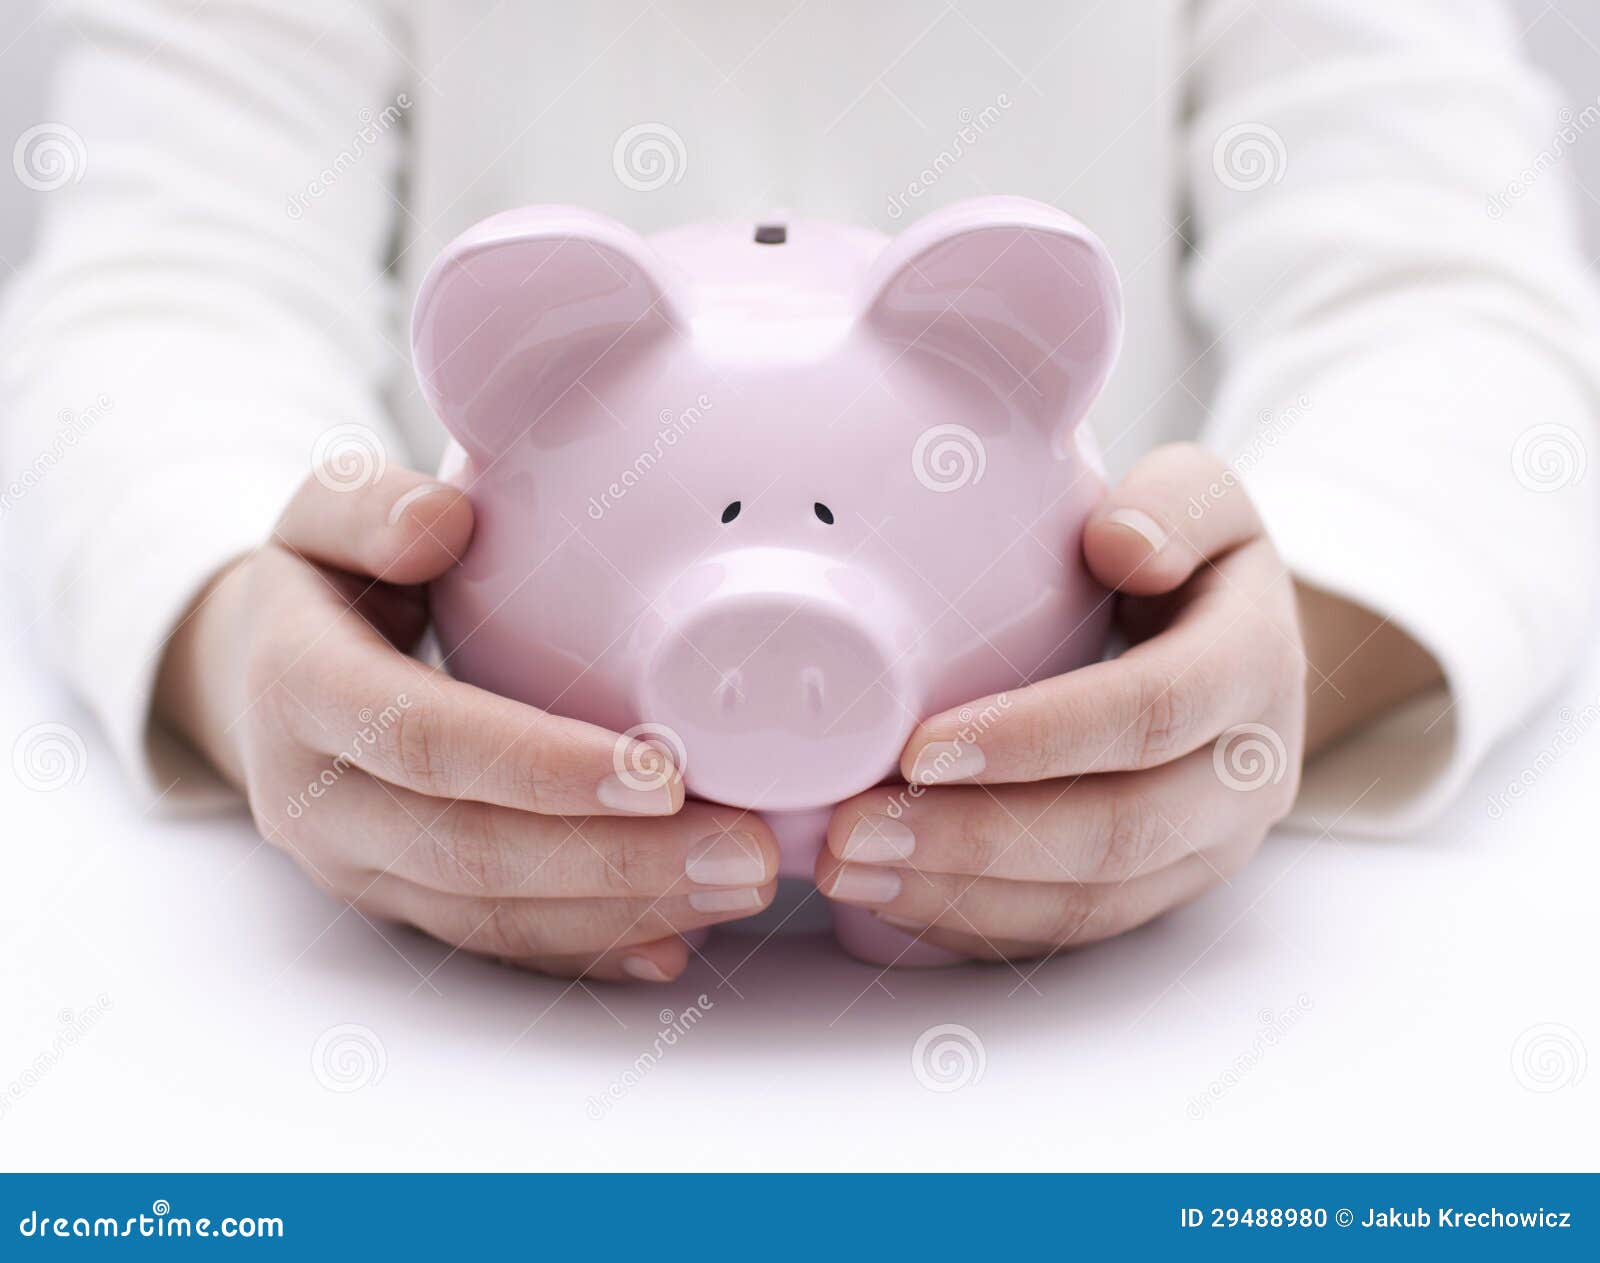 piggy bank protected by hands